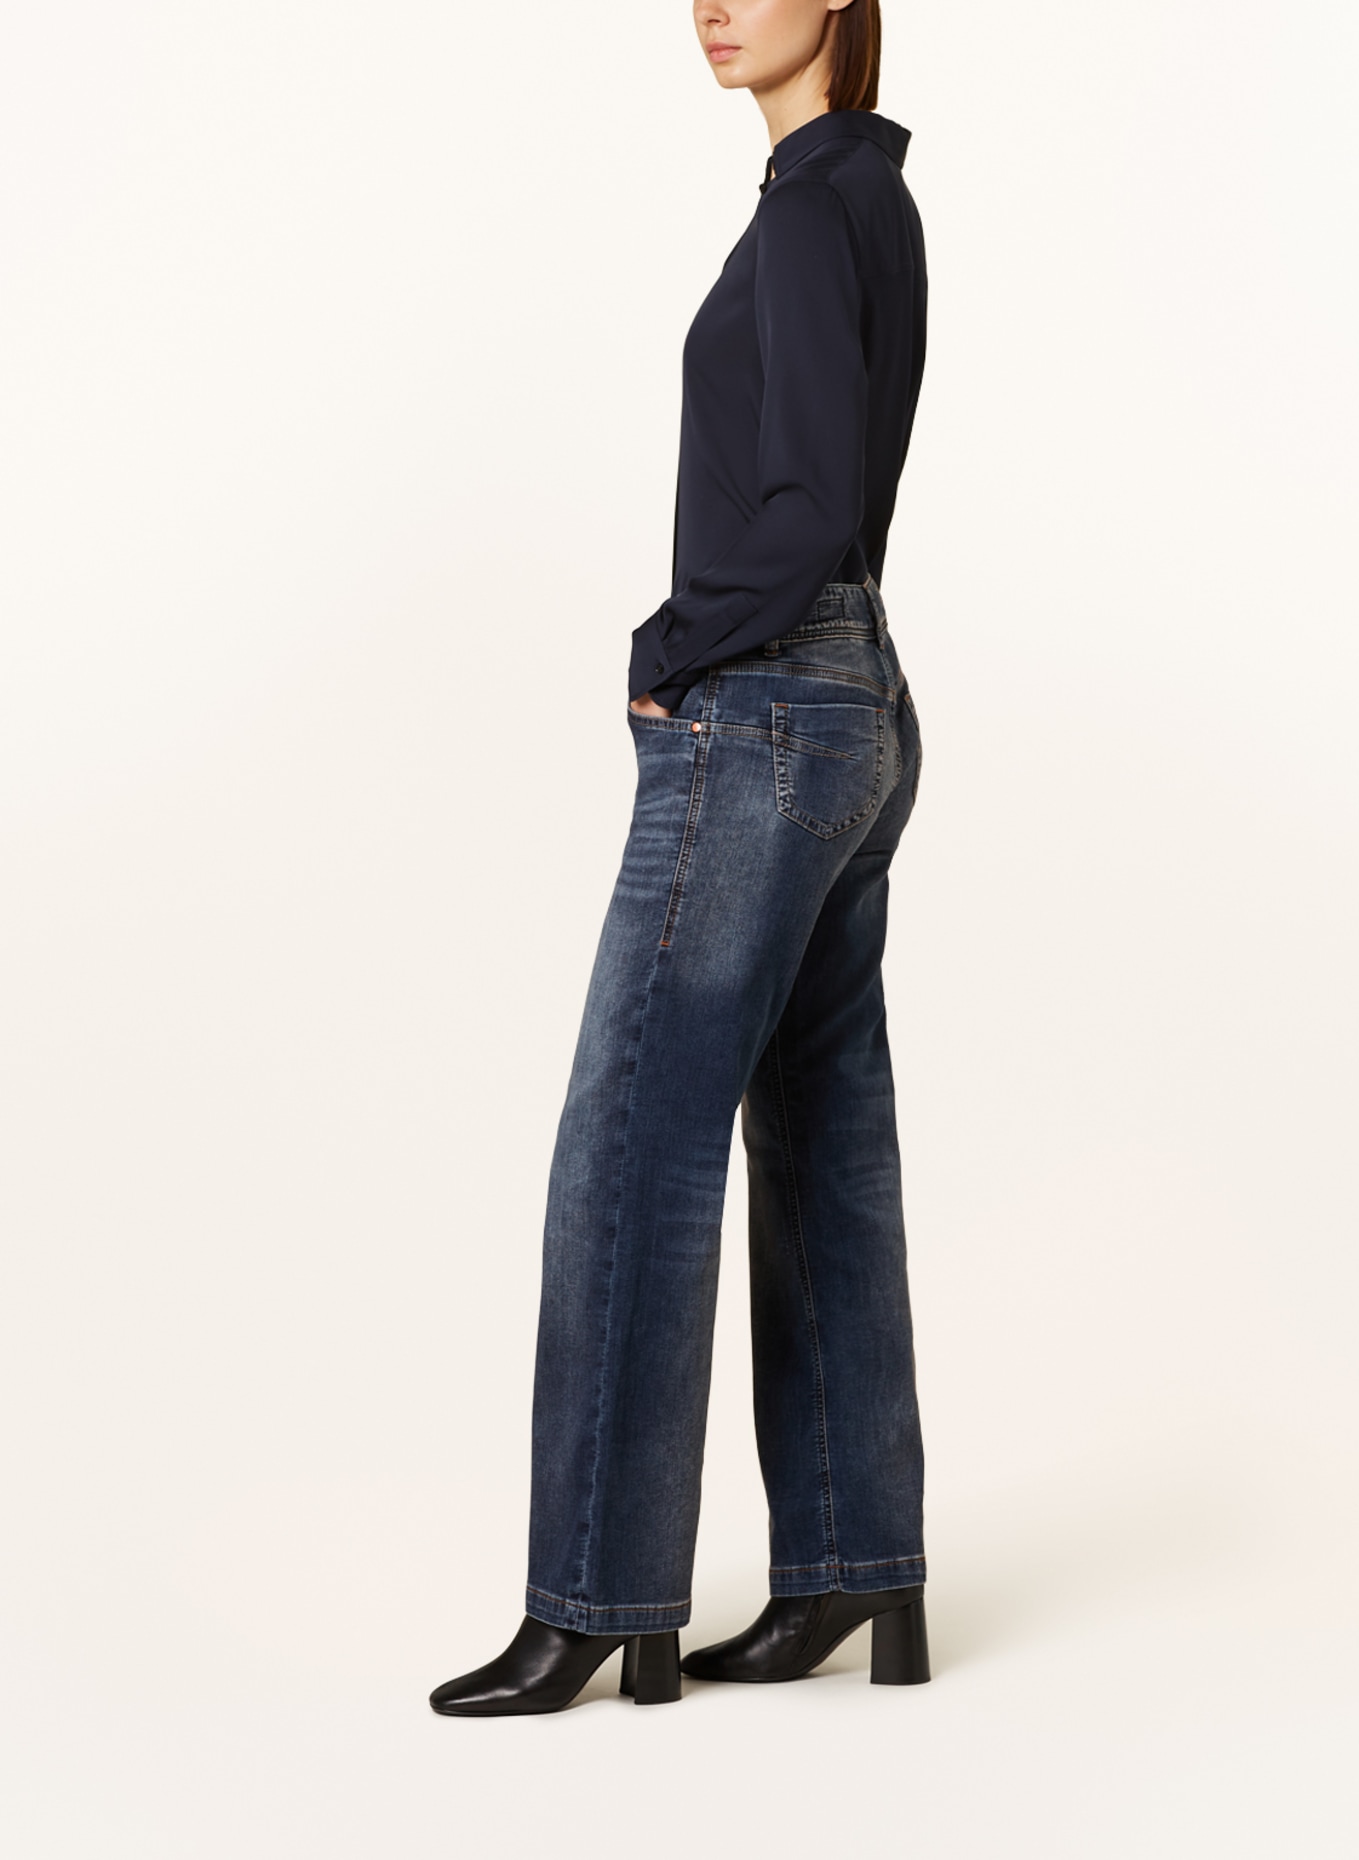 Herrlicher Flared jeans EDNA, Color: 771 releaxed (Image 4)